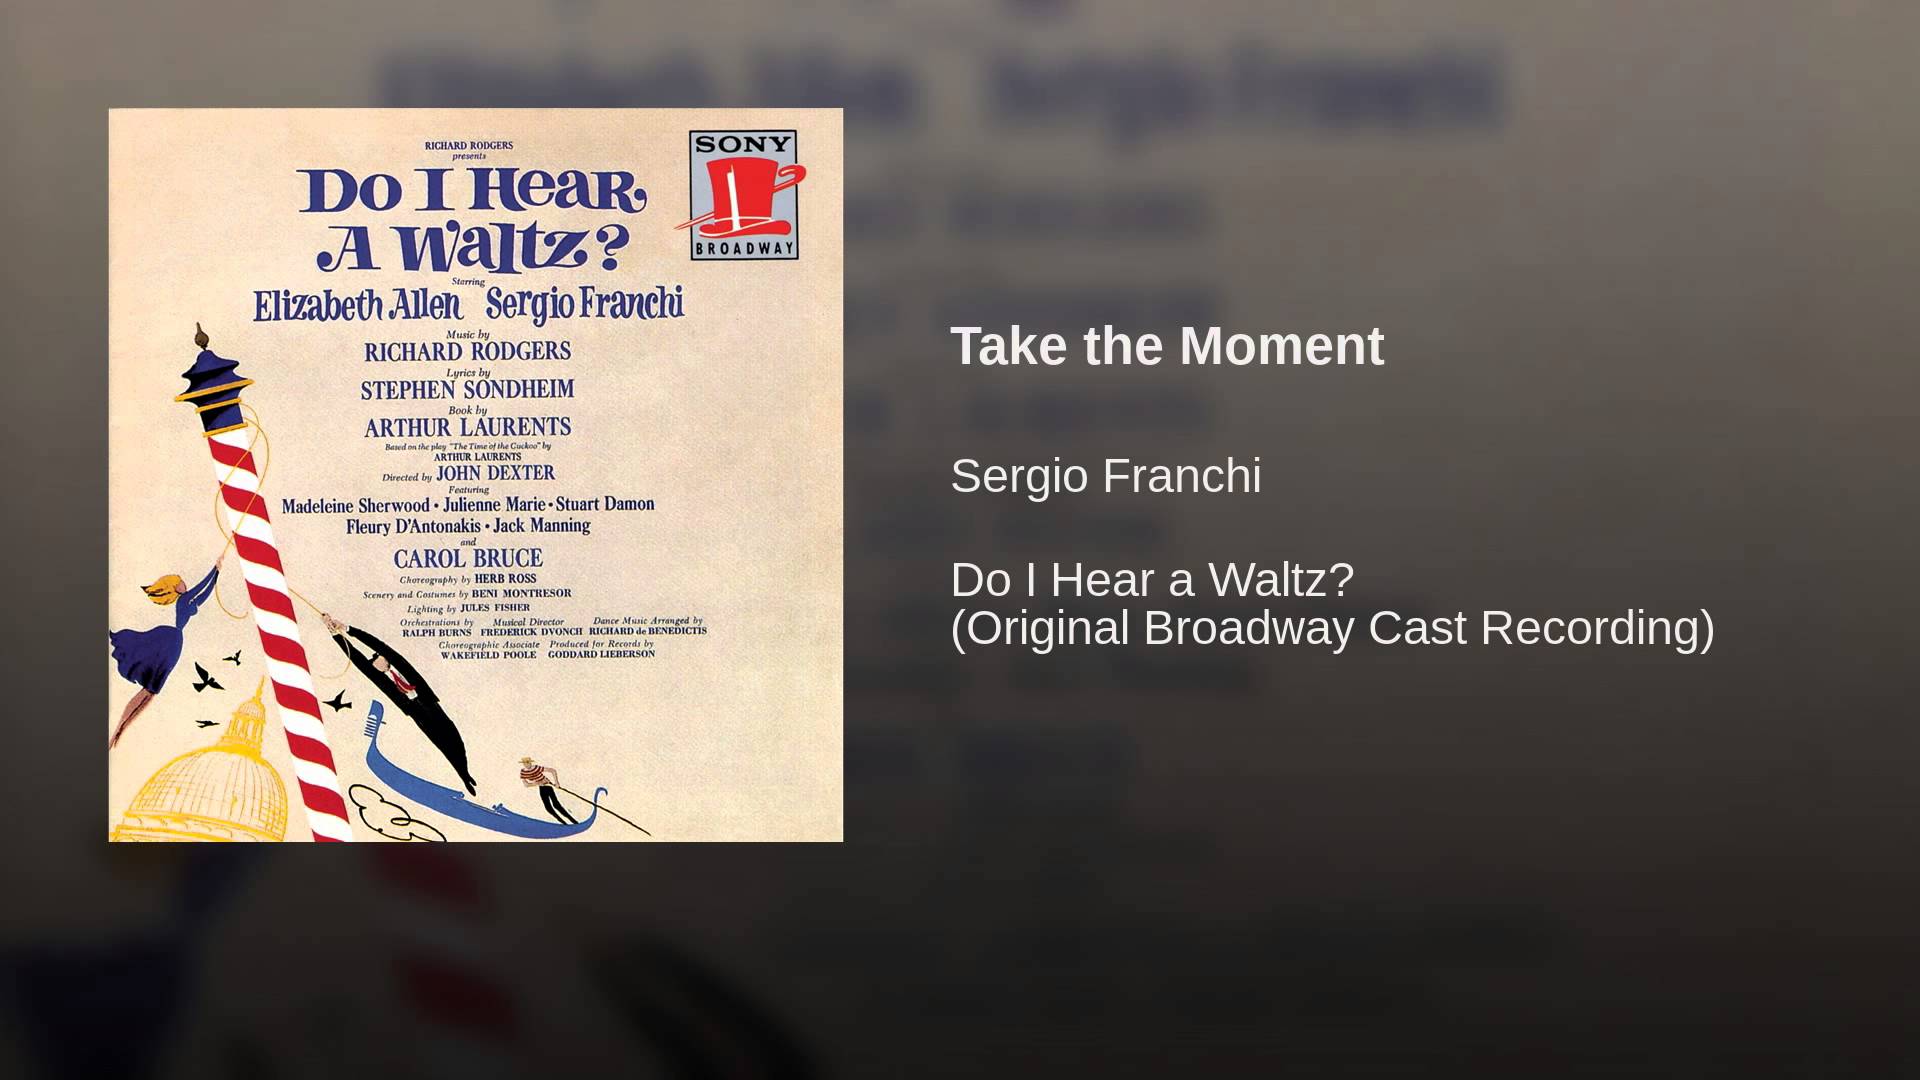 Richard Rodgers:  Take the Moment